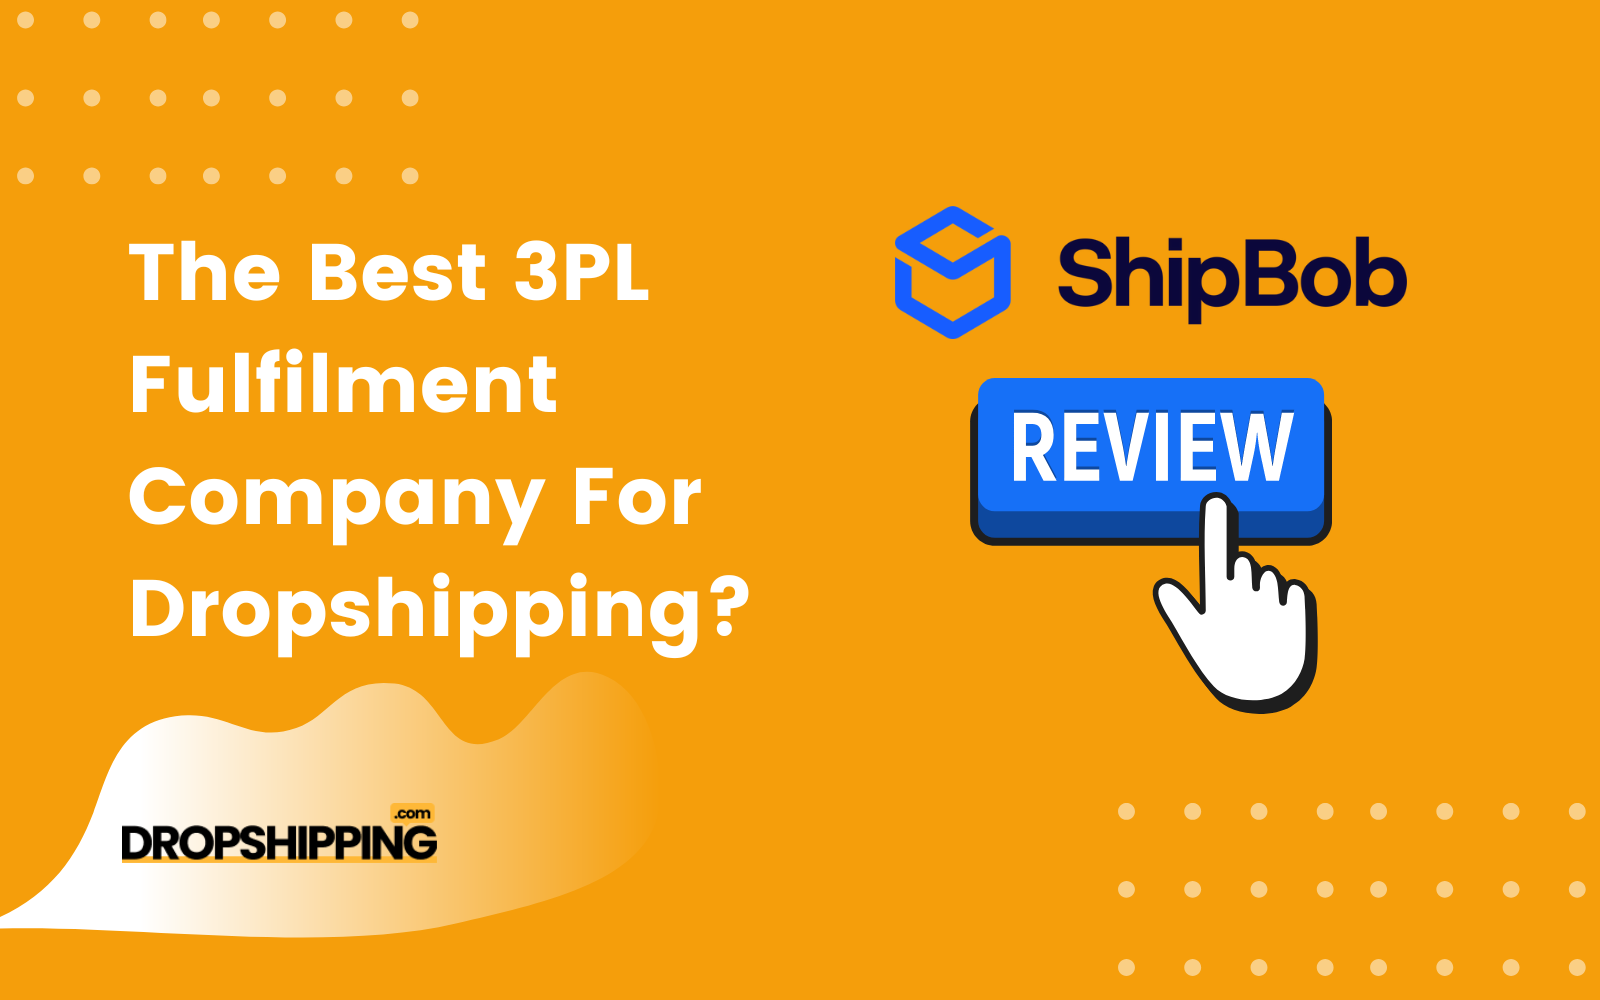 ShipBob Review: The Best 3PL Fulfilment Company For Dropshipping?